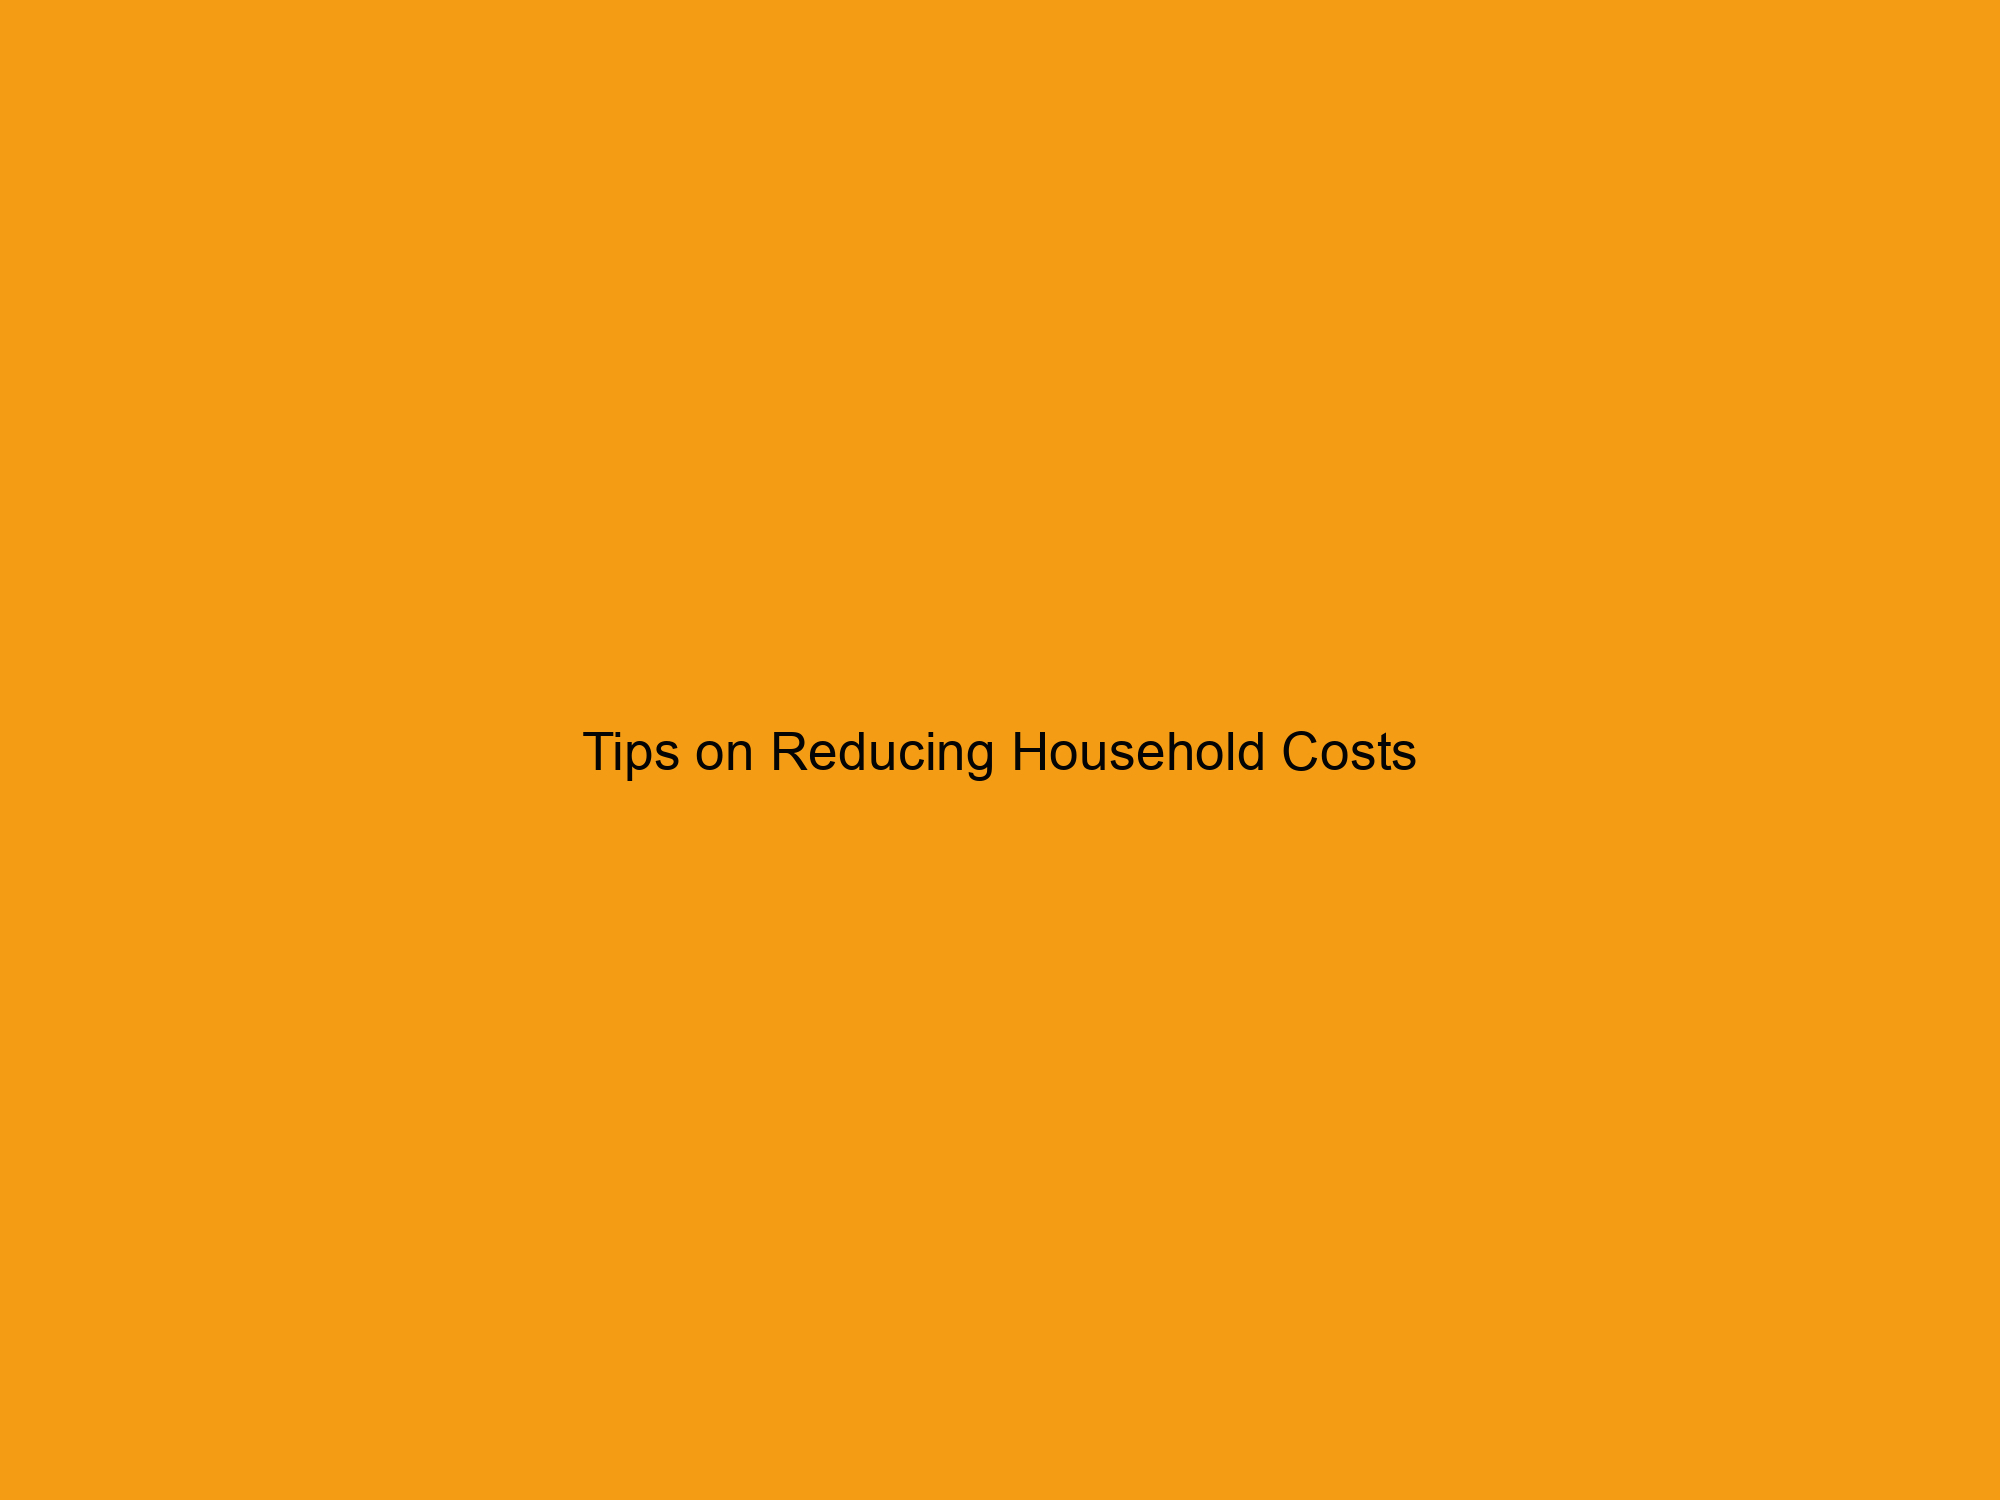 Tips on Reducing Household Costs